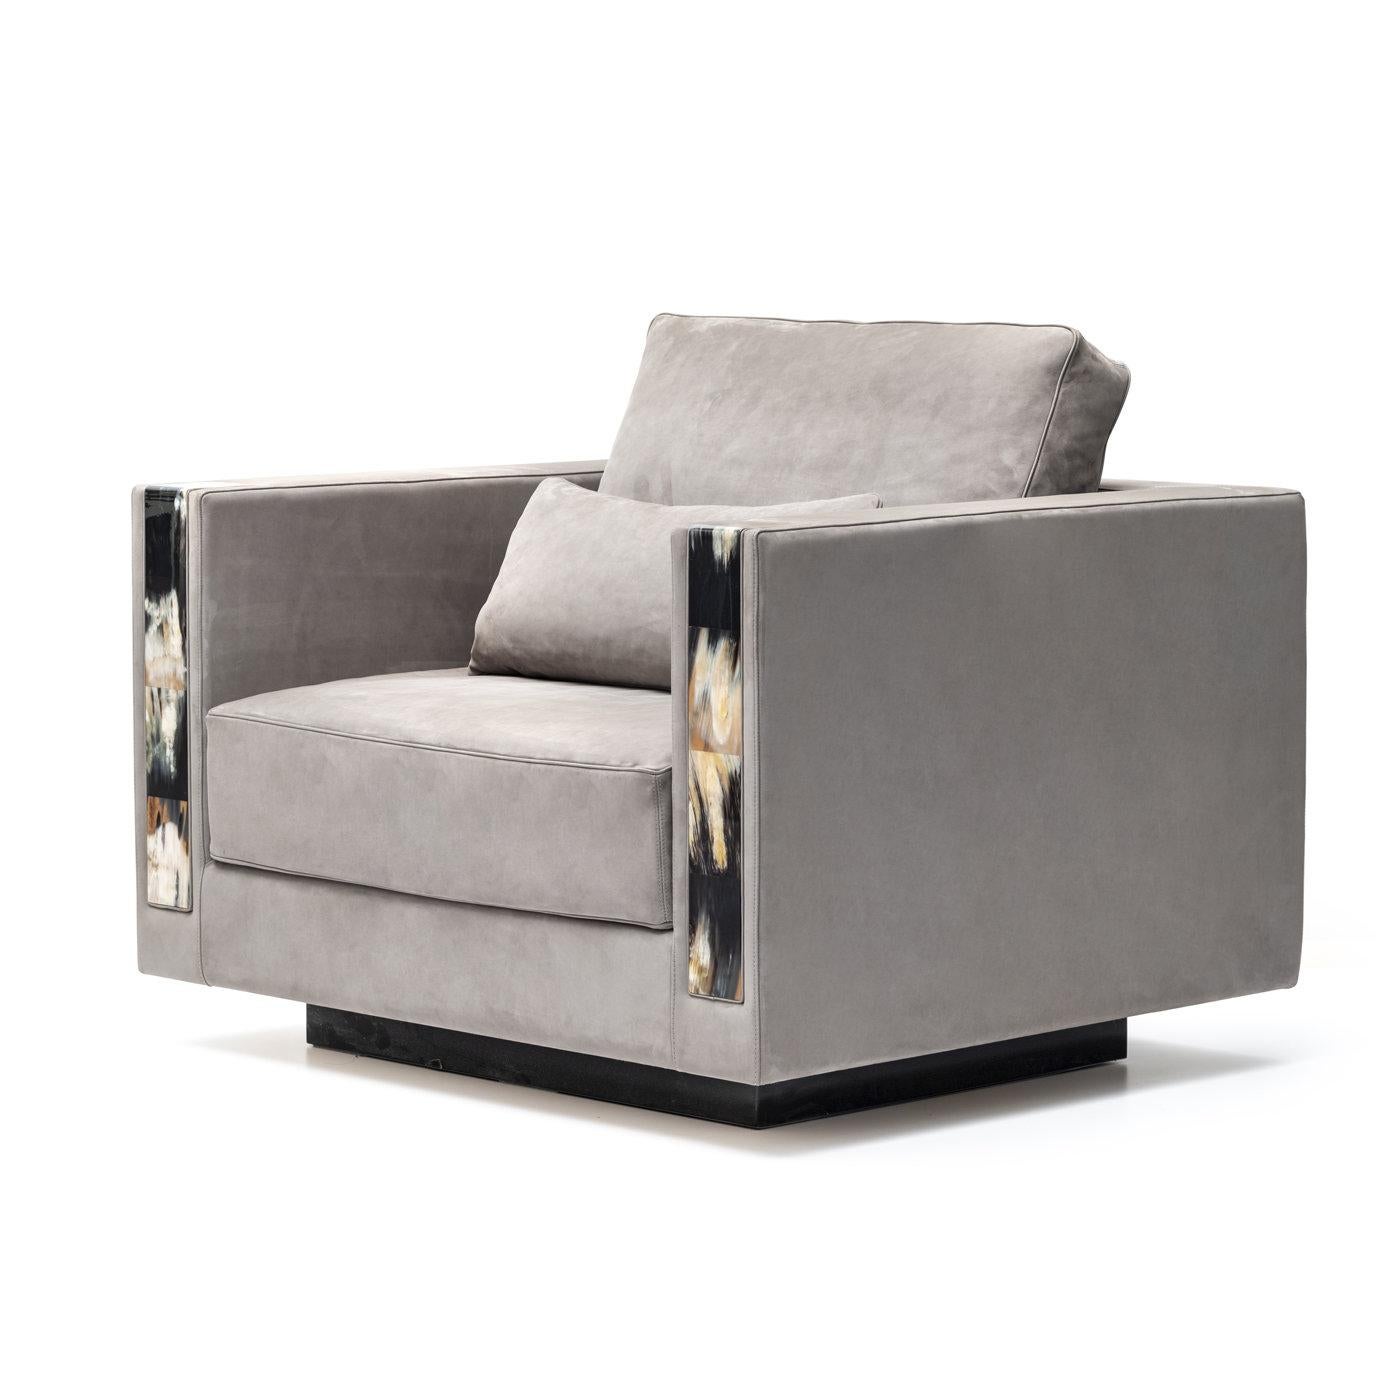 An eye-catching combination of square, bold lines, and prized materials distinguishes this exquisite armchair. It rests on a square, black, wooden base lacquered with a glossy finish and comes with soft cushions as per photo. The square armrests